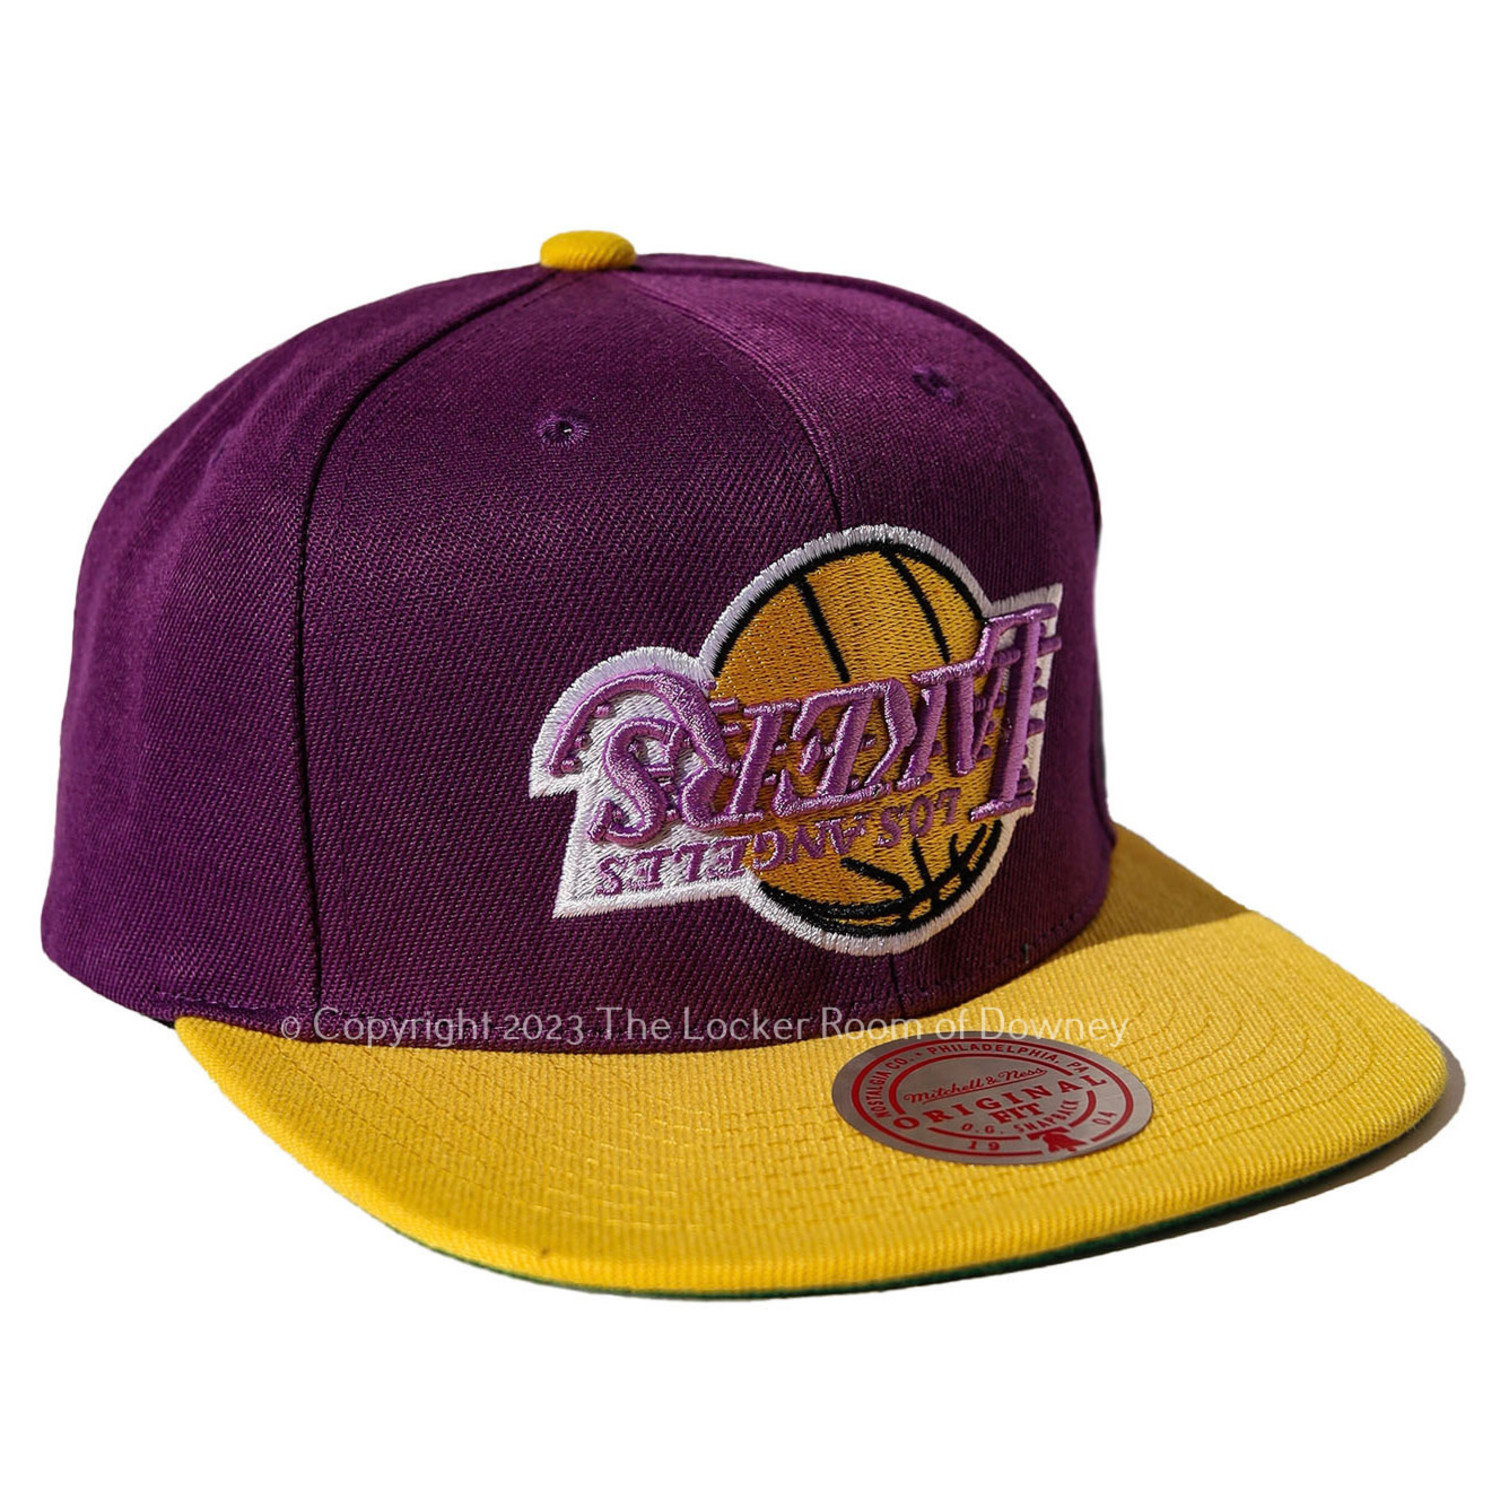 Men's Mitchell & Ness Purple/Gold Los Angeles Lakers Upside Down